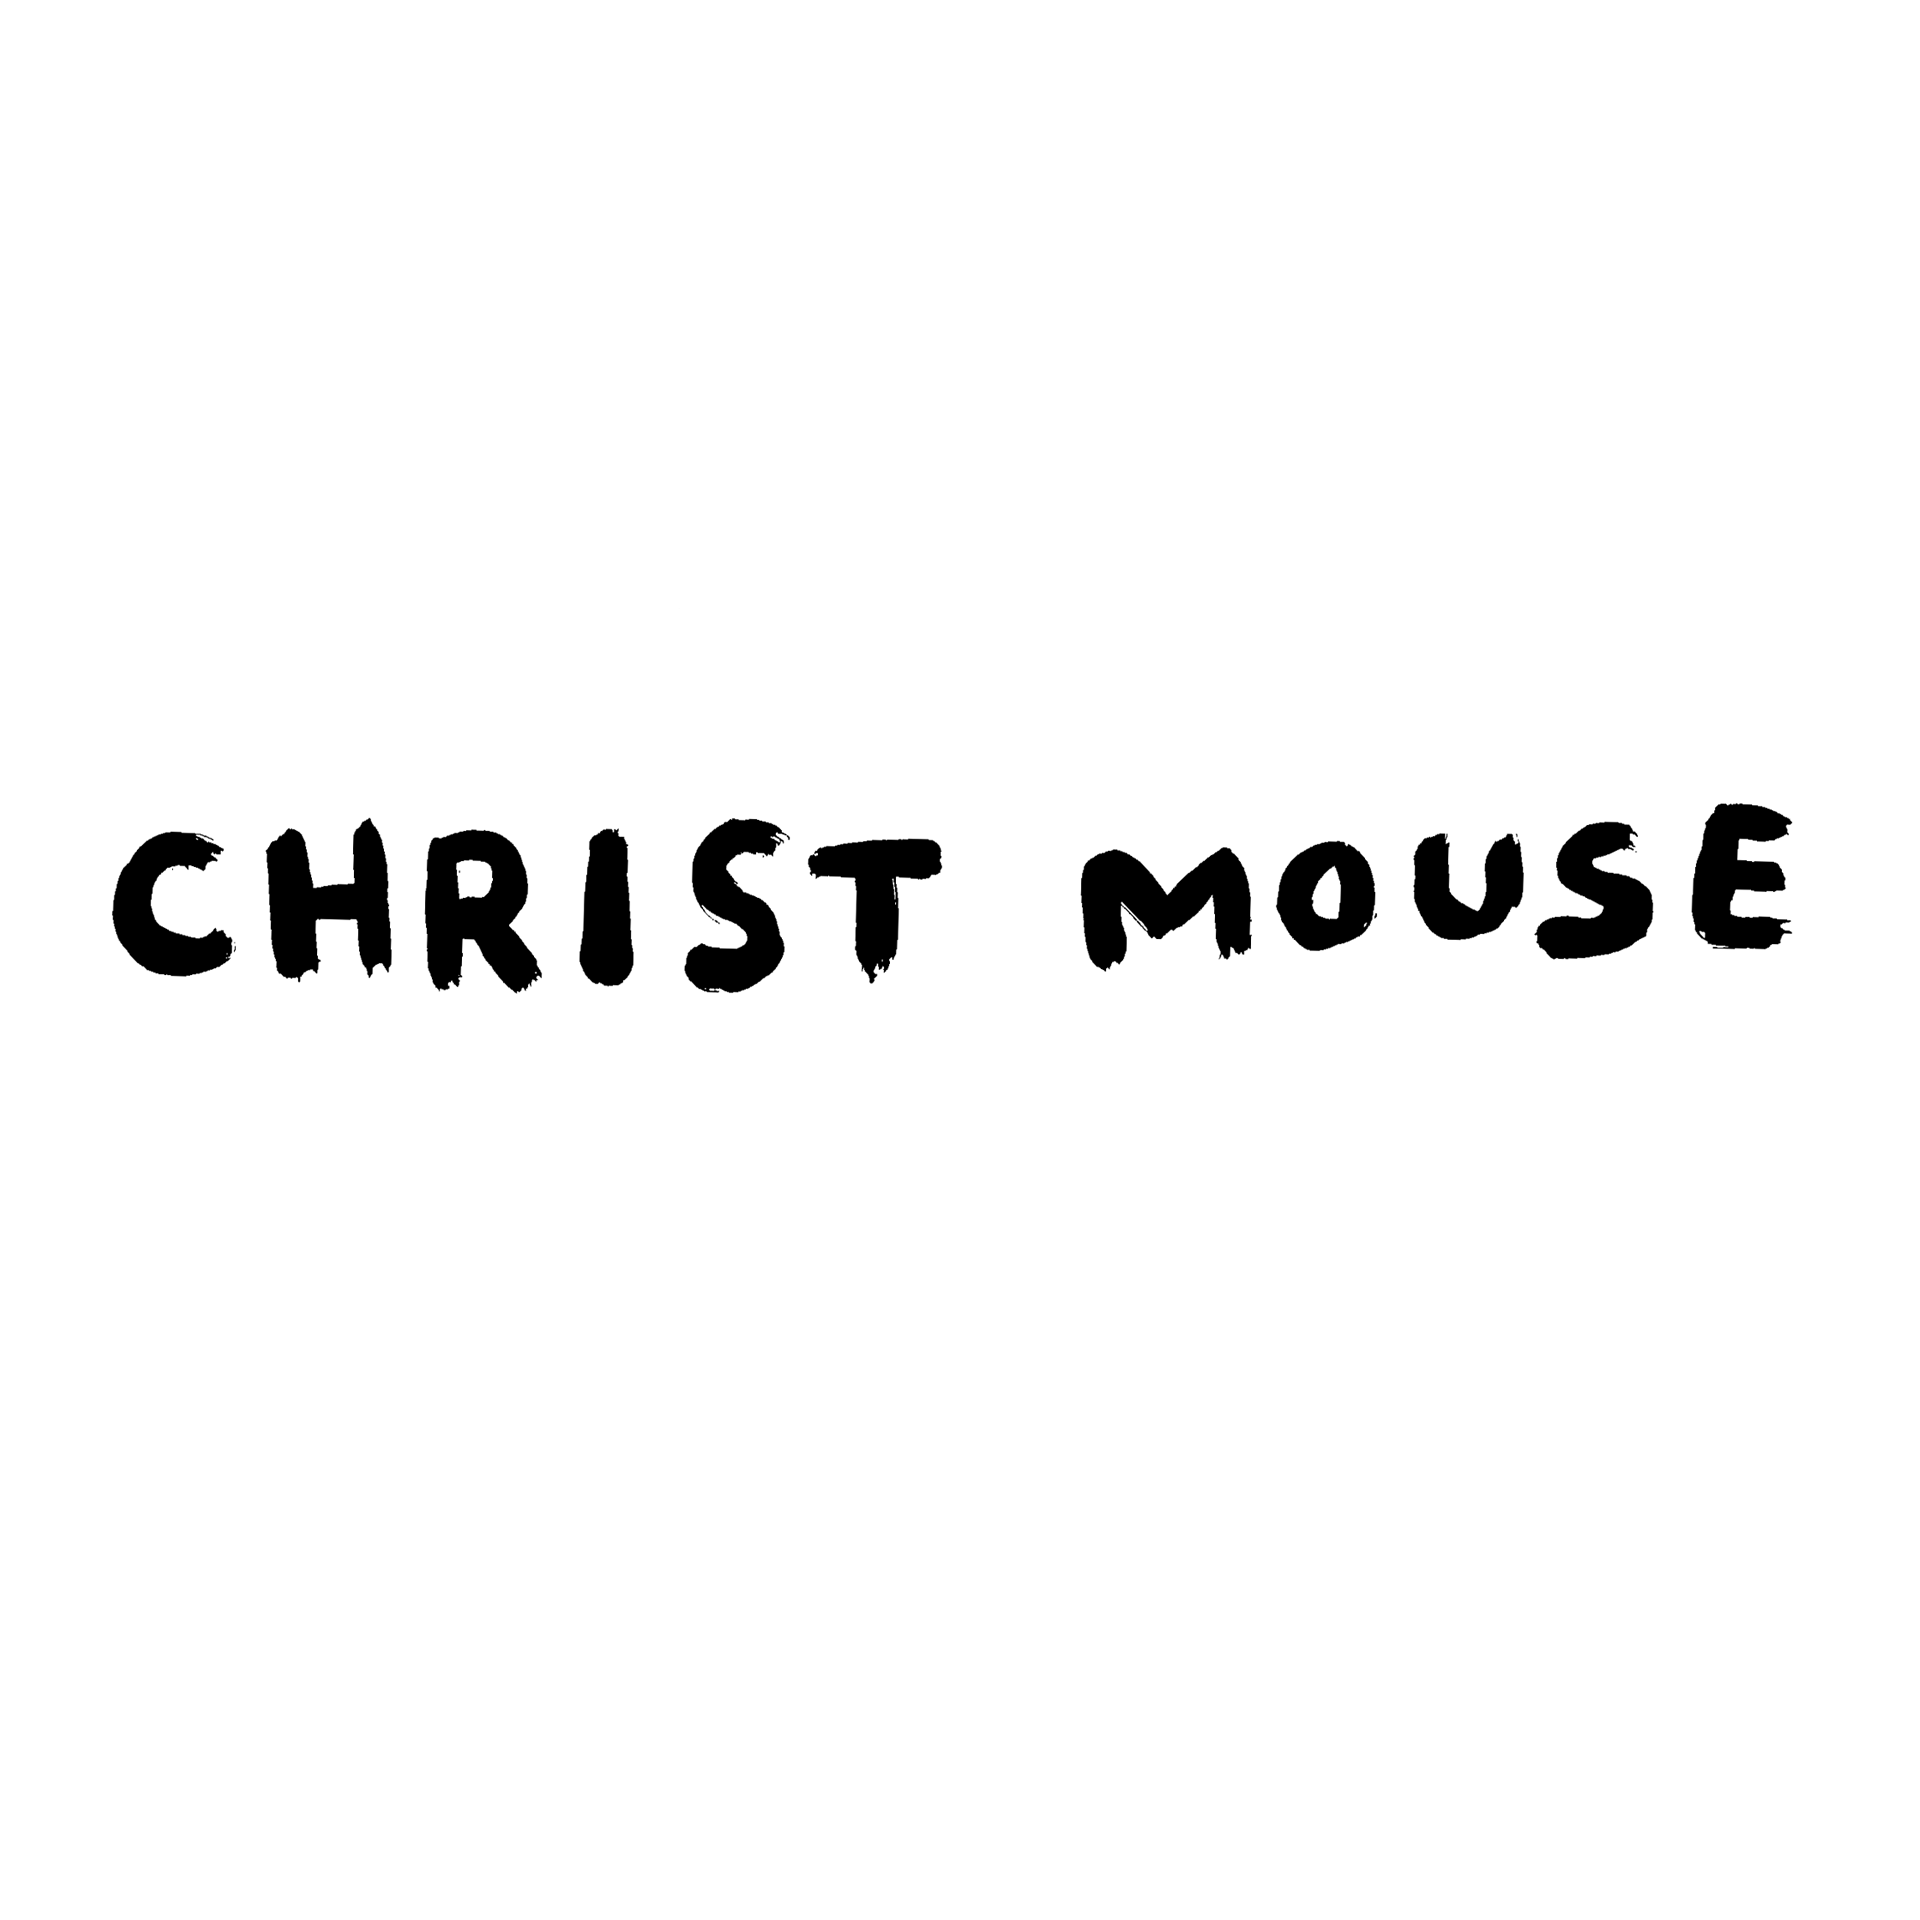 CHIRIST MOUSE